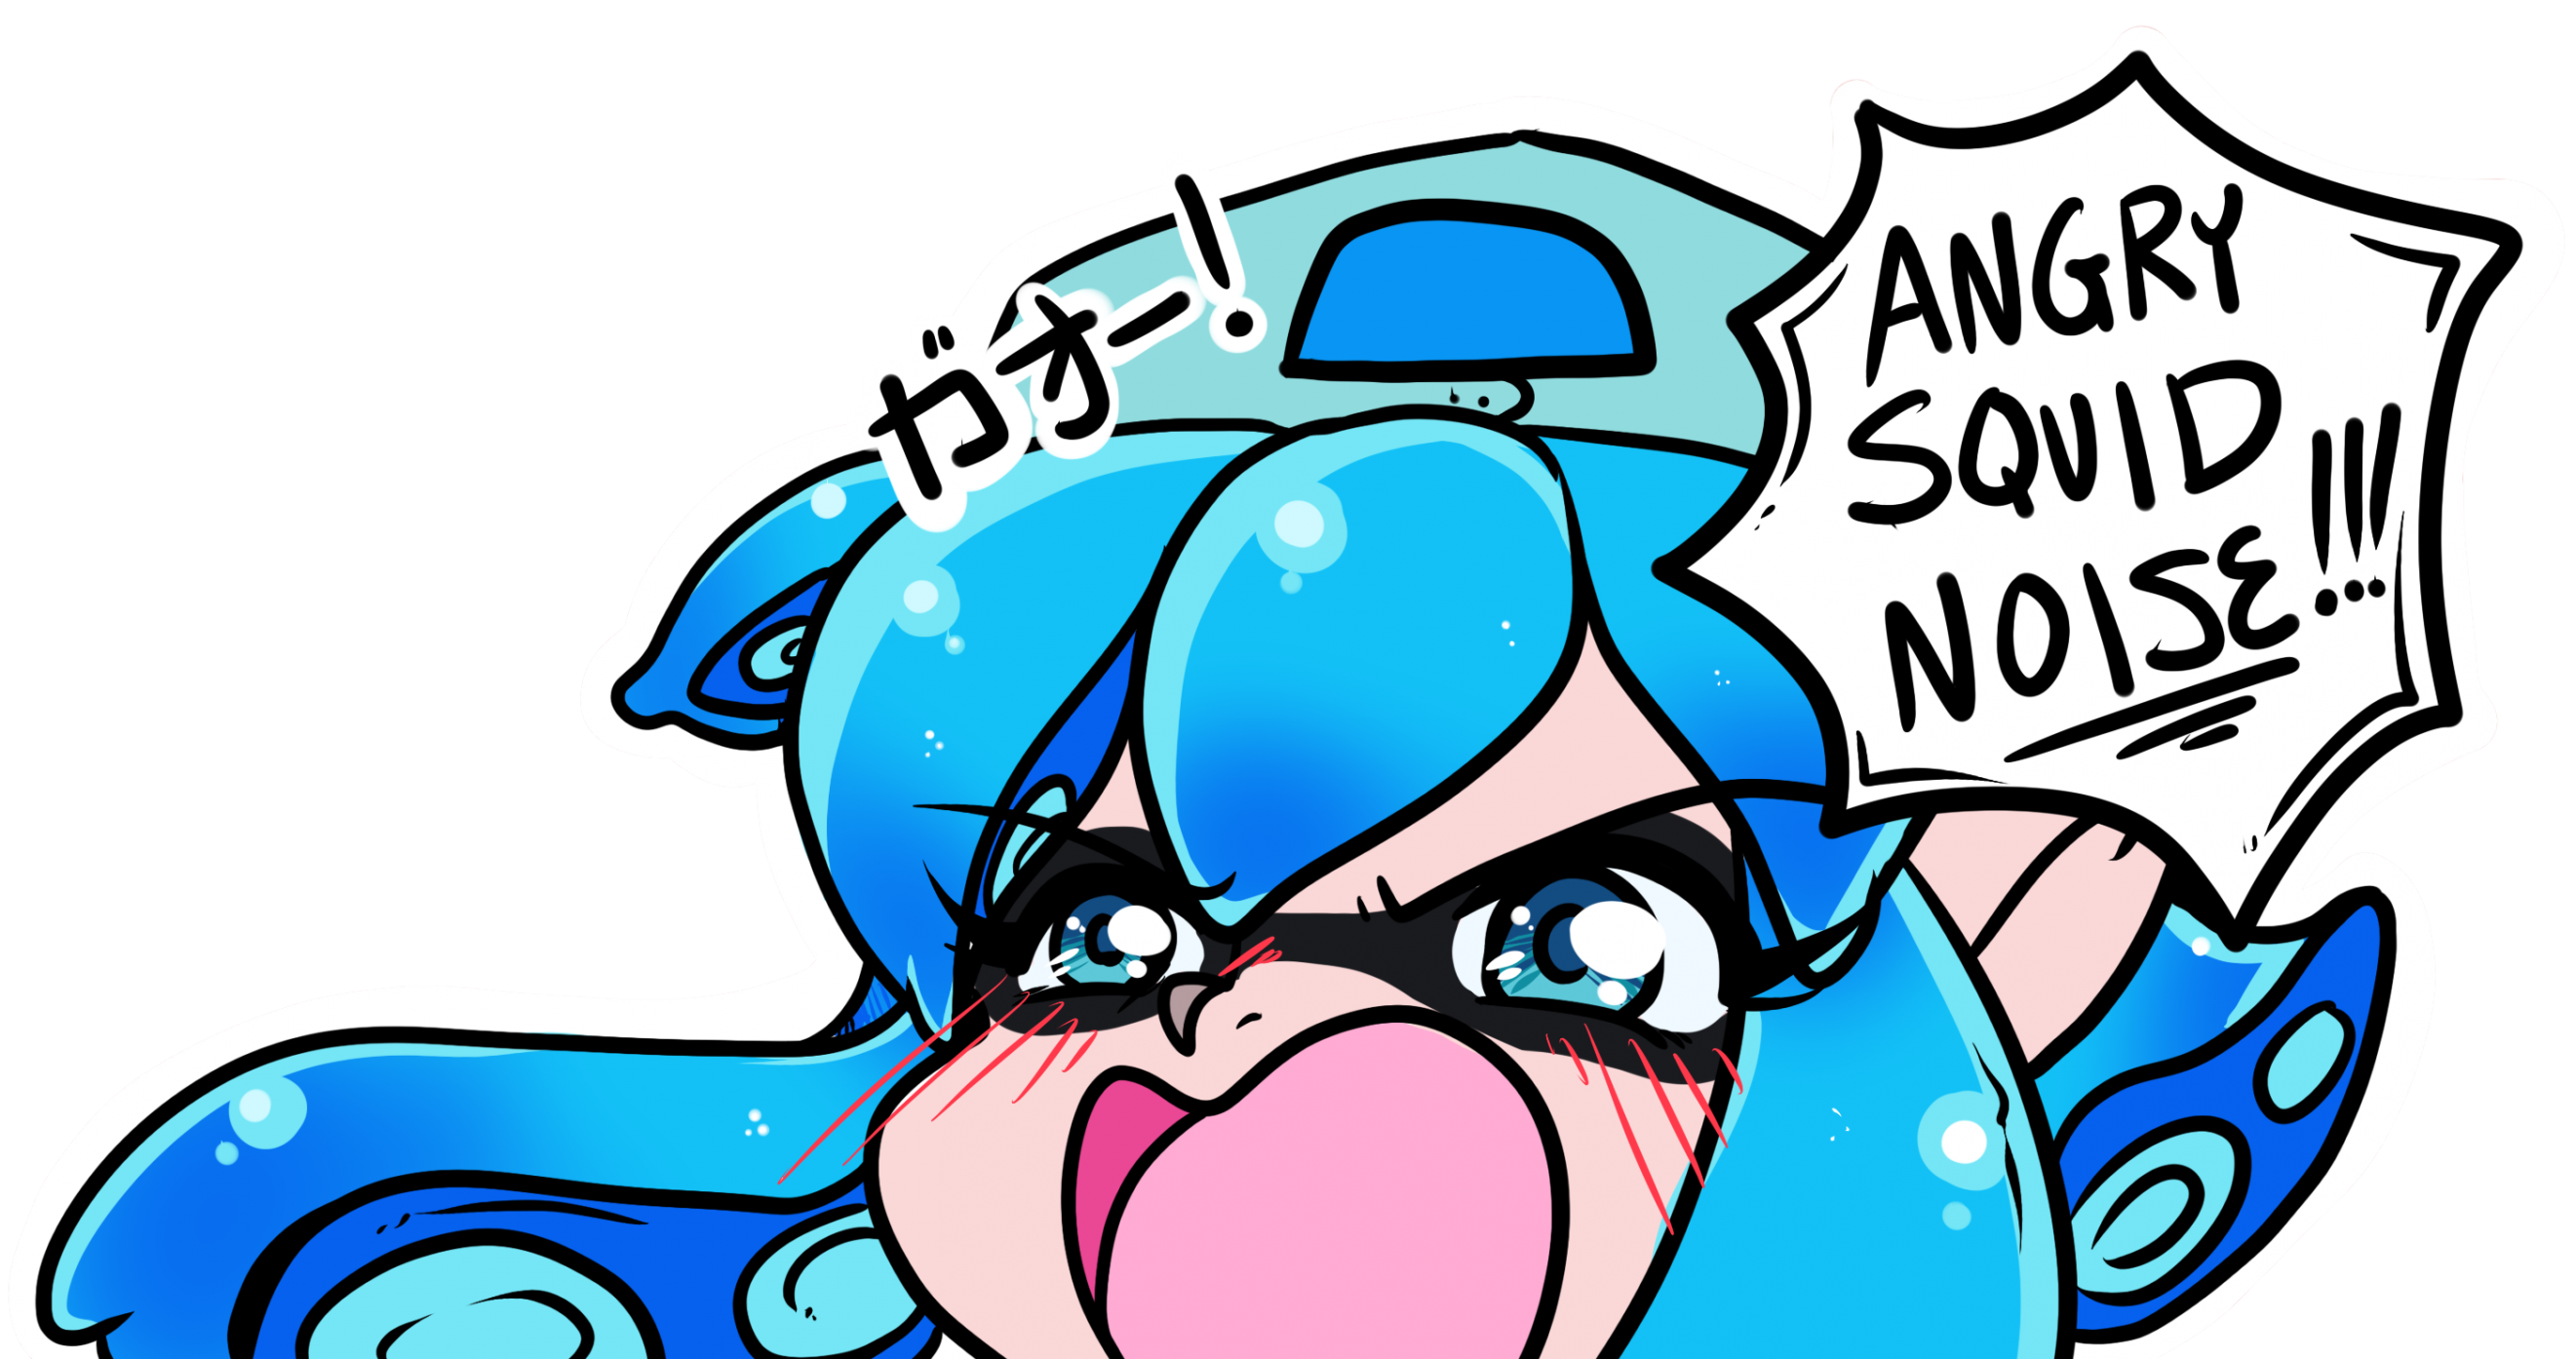 Angry squid noises!! by RindropSquid -- Fur Affinity [dot] net